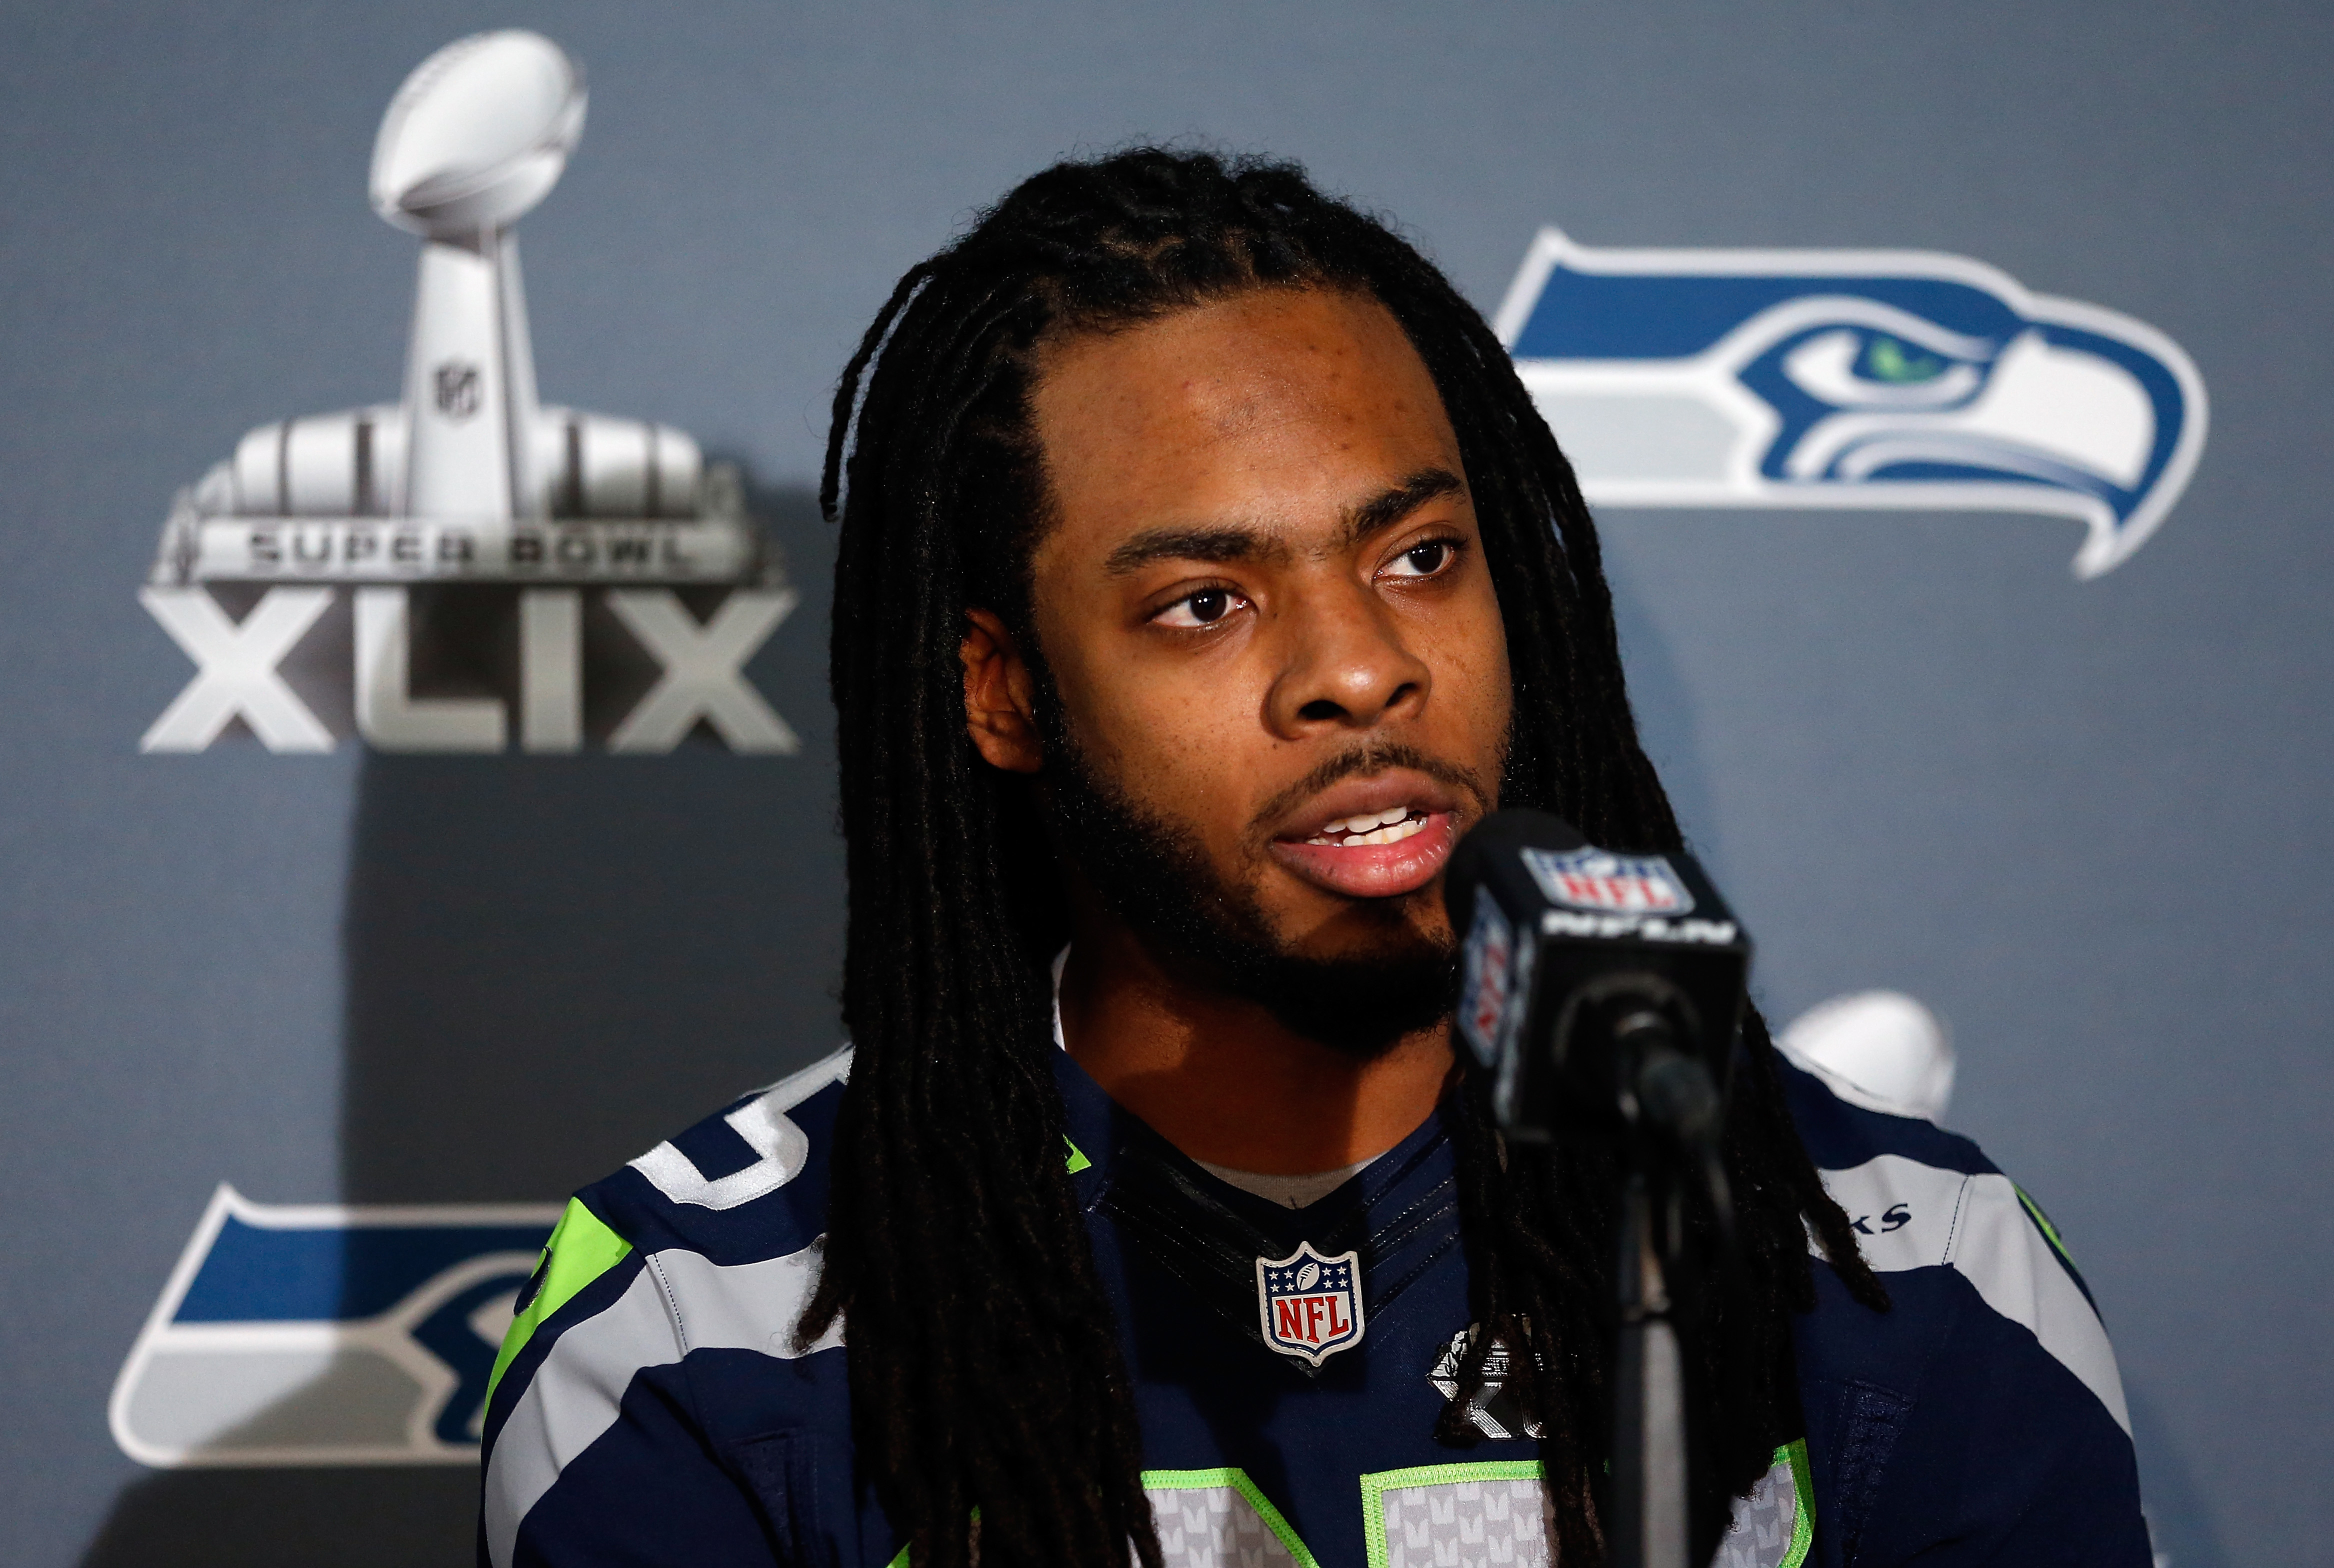 Richard Sherman of the Seattle Seahawks speaks during a Super Bowl XLIX media event on Jan. 28, 2015 in Chandler, Arizona.